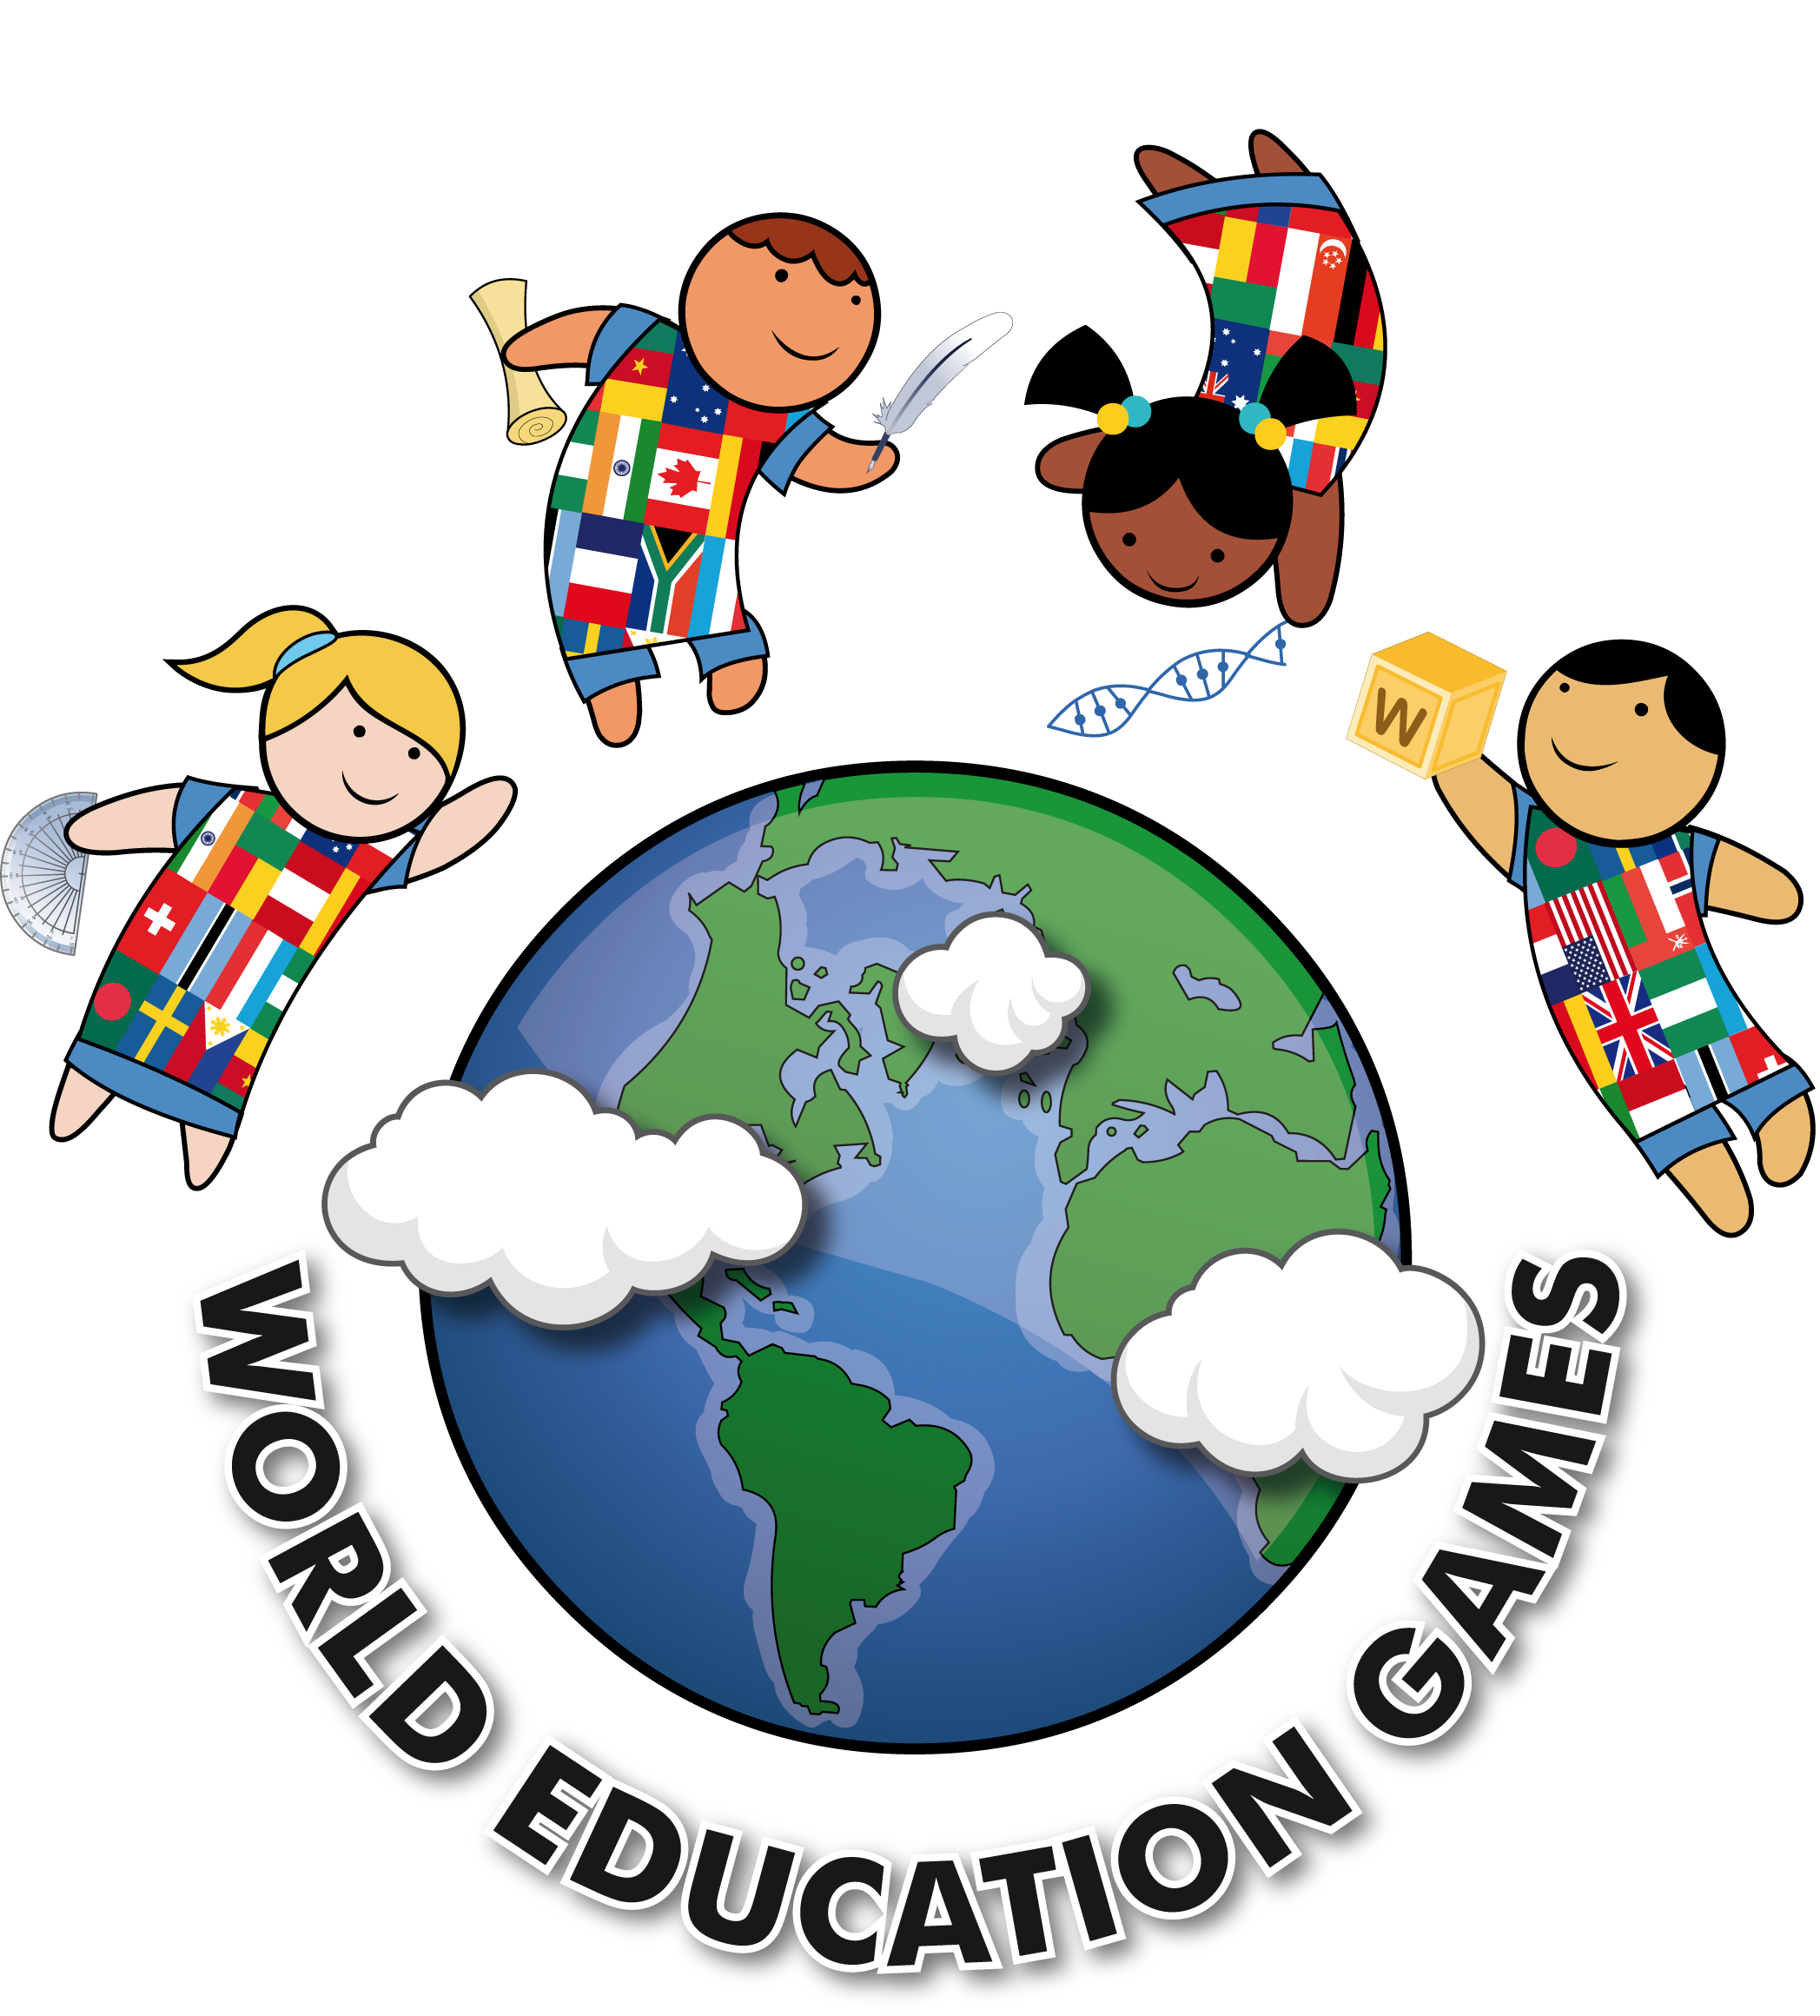 World-Education-Games-Round-Png.png